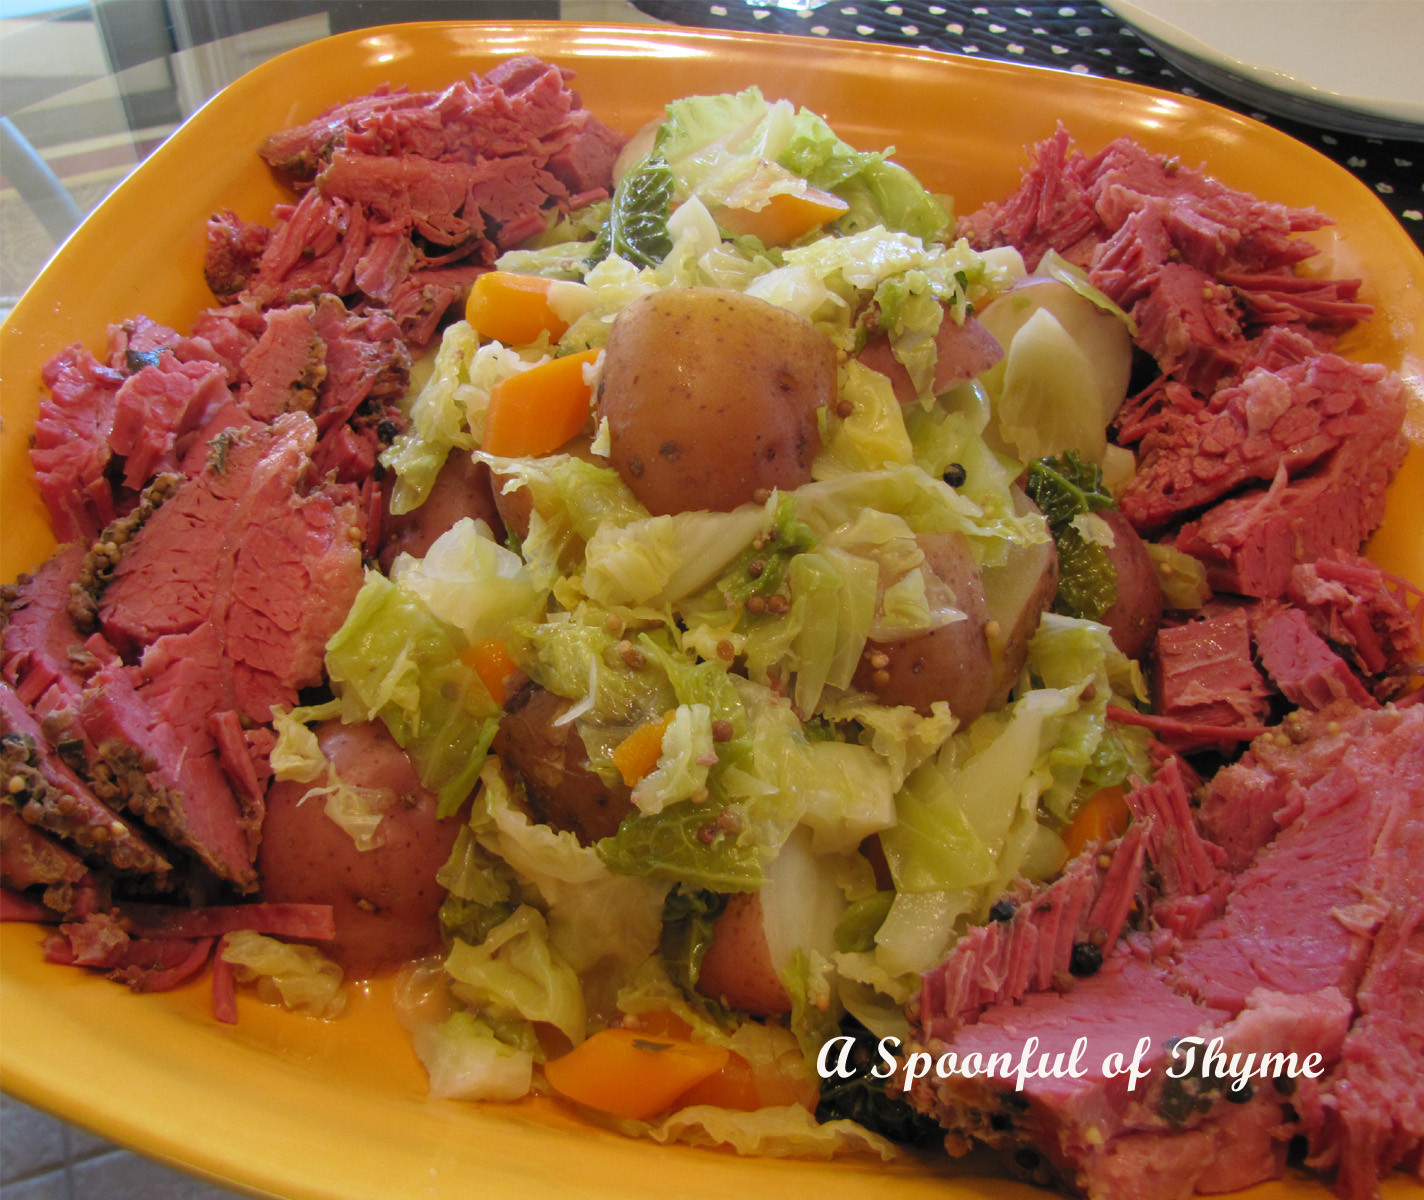 Corn Beef And Cabbage
 A Spoonful of Thyme Corned Beef and Cabbage